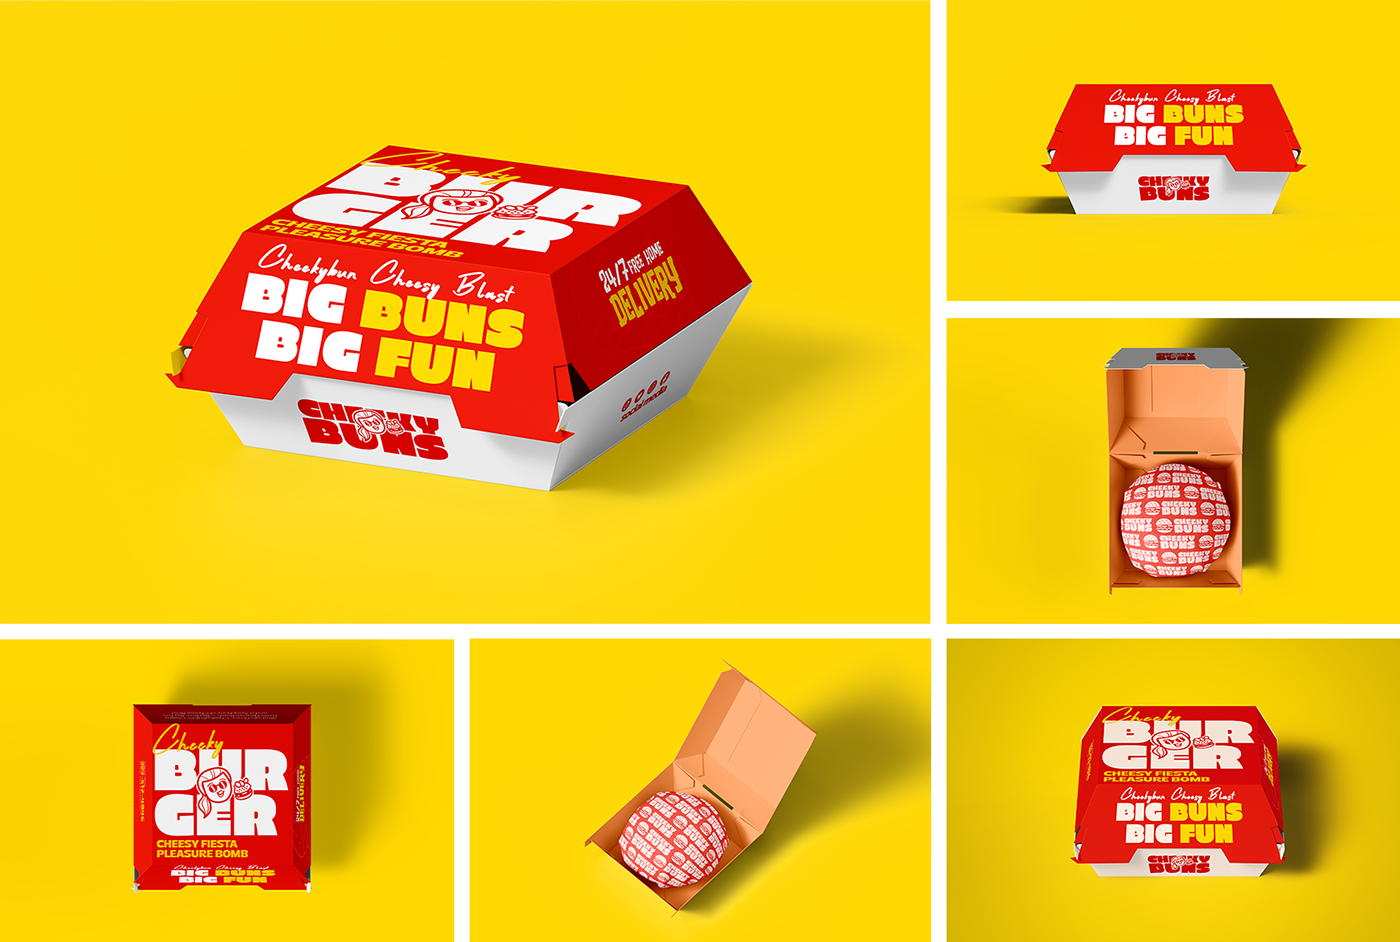 Introducing CheekyBUNS – Where Burgers are Big, Bites are Bold, and Fun is the Main Ingredient!